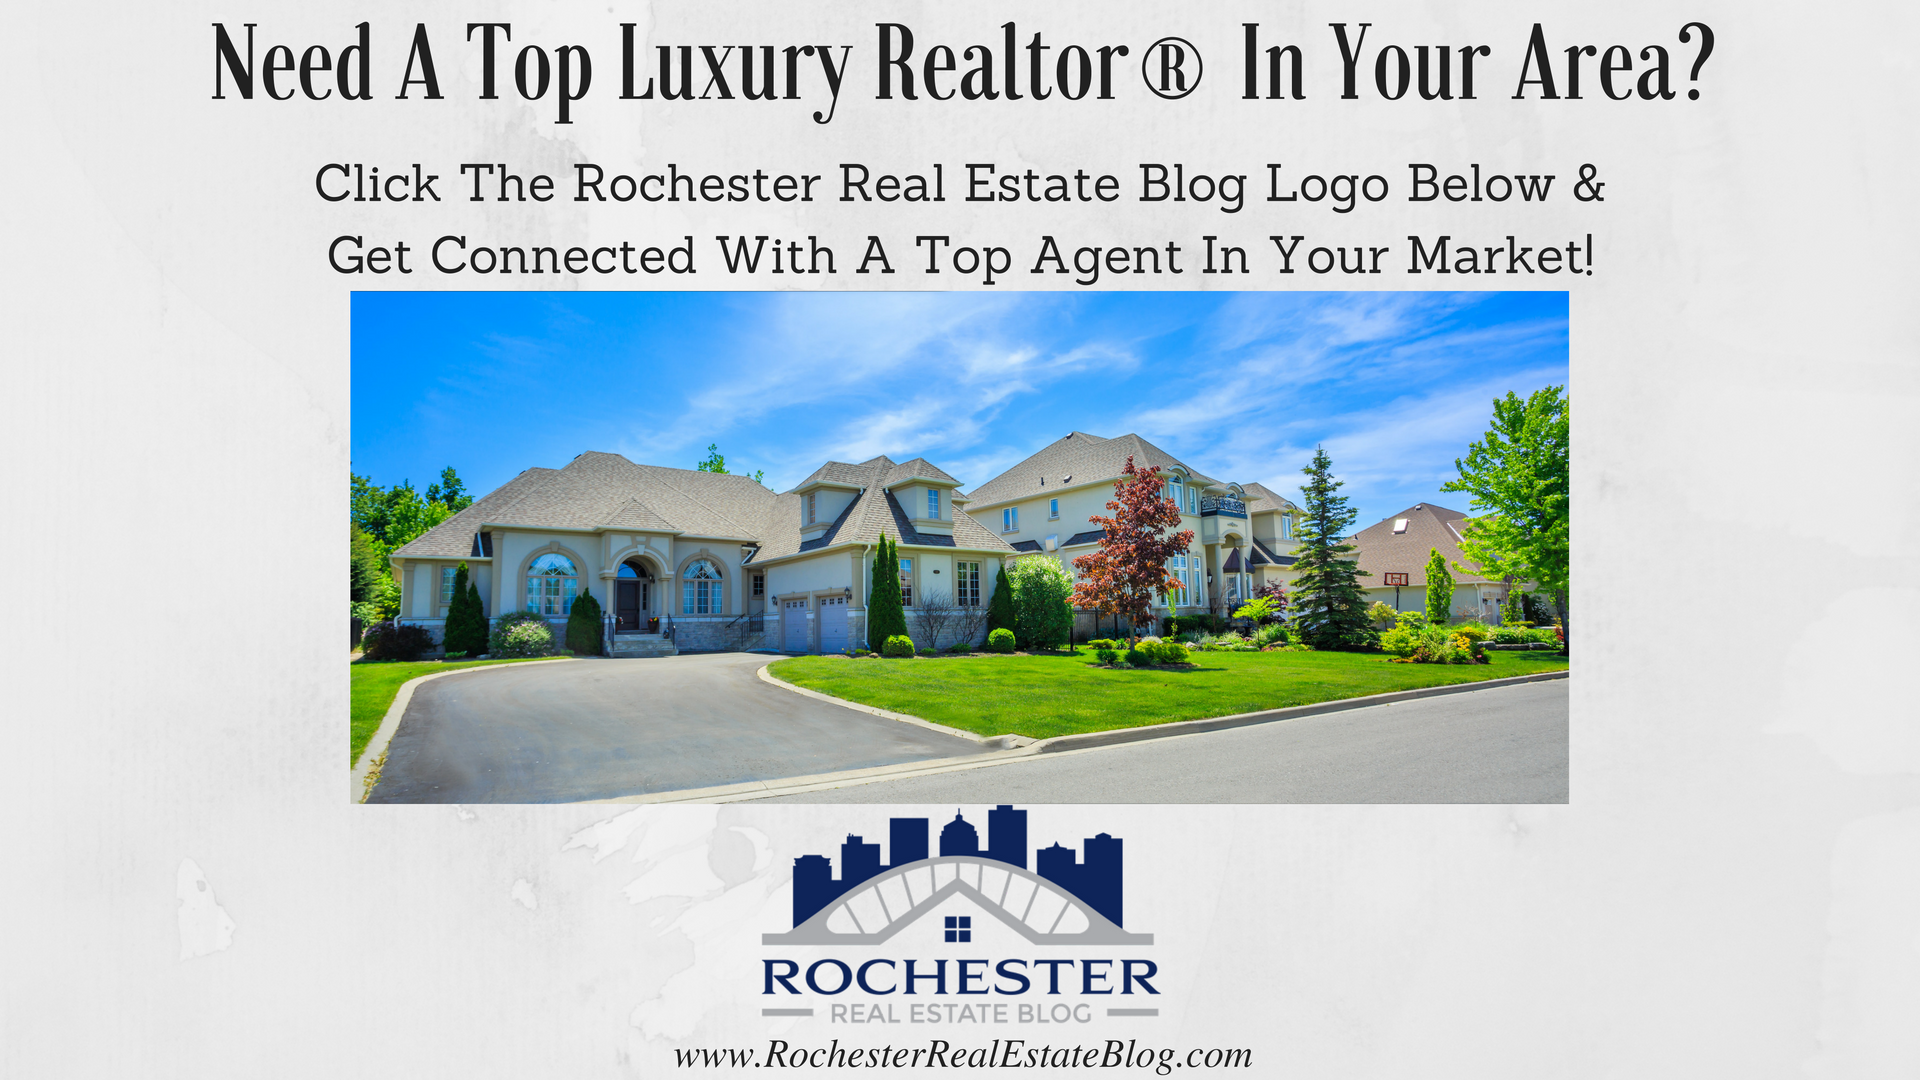 Get Connected With A Top Luxury Realtor® In Your Area